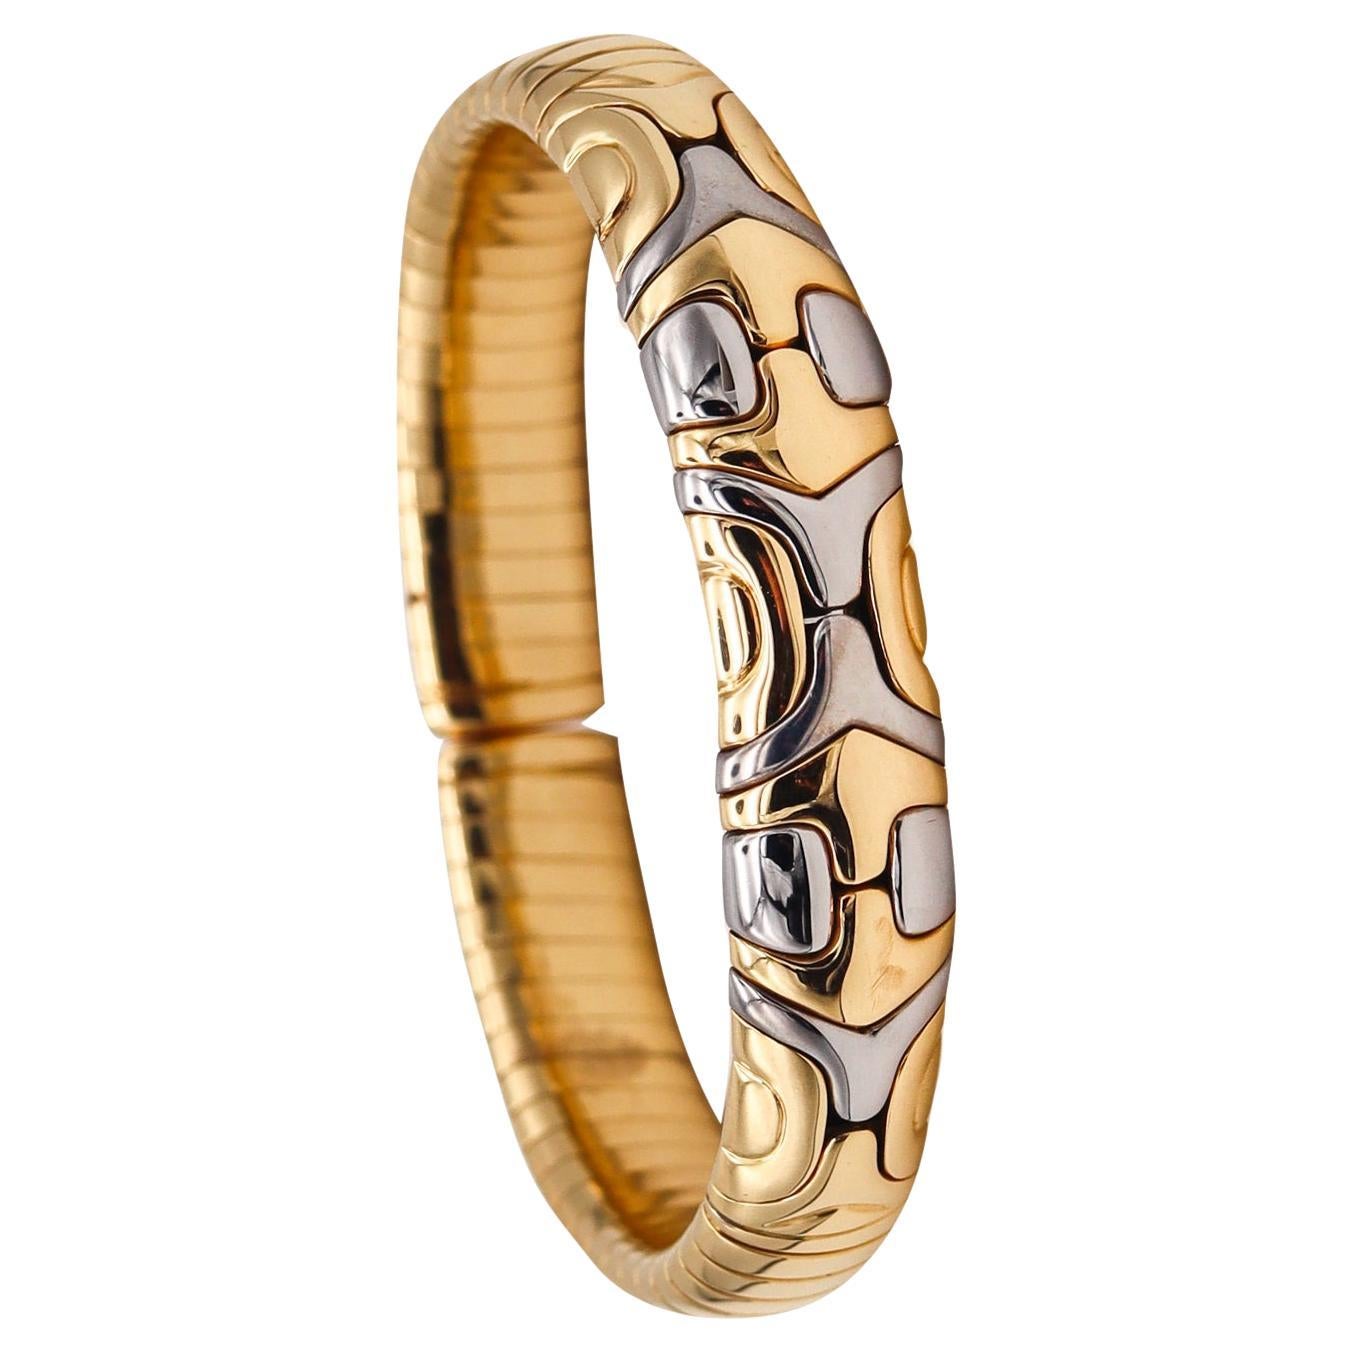 Bvlgari Roma Classic Alveare Cuff Bracelet in Solid 18Kt Yellow Gold and Steel